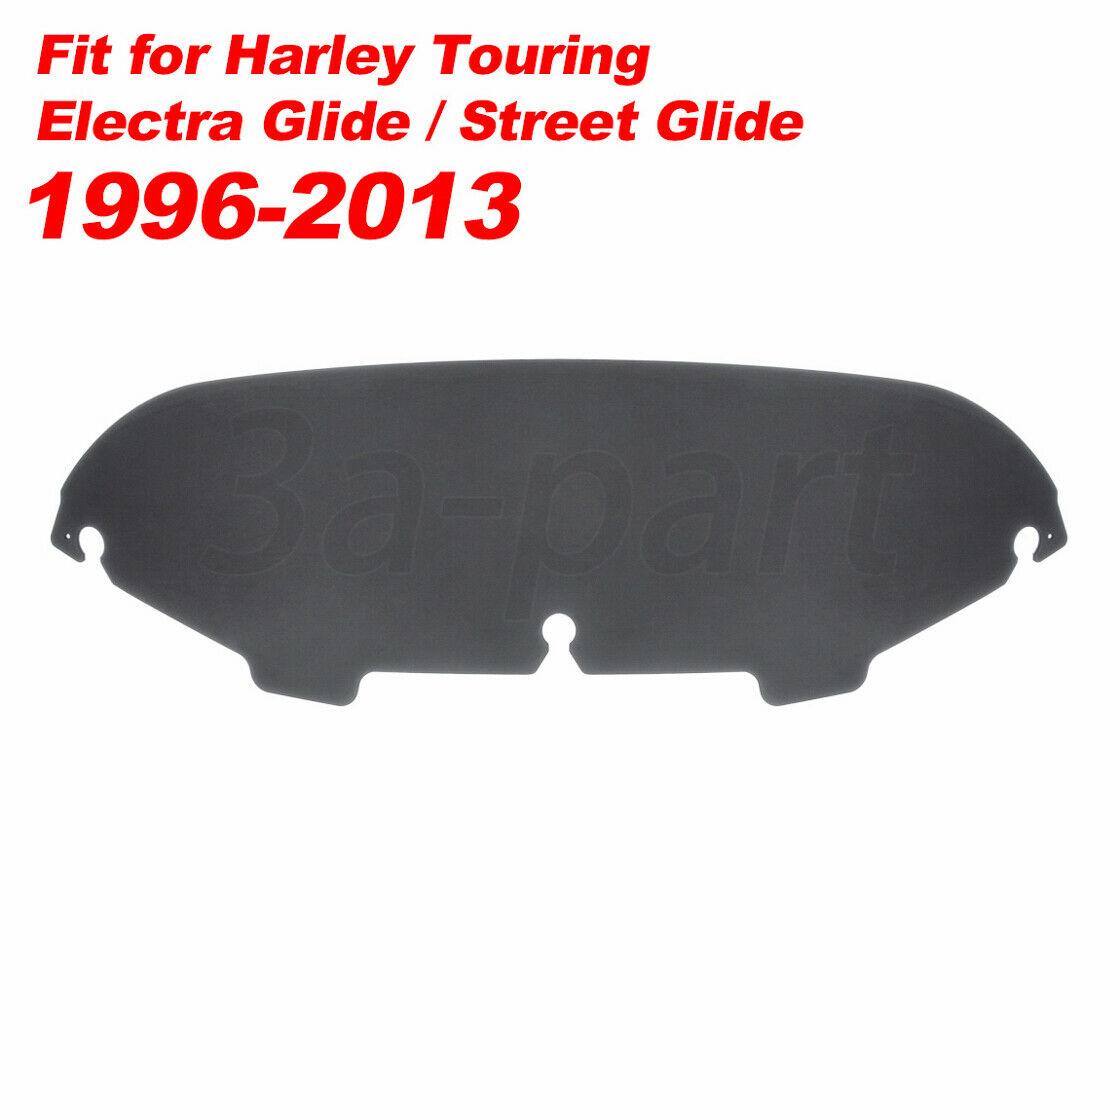 5" Round Smoke Windsheild Fit For Harley Touring Tri Glide Ultra Classic 1996-13 - Moto Life Products